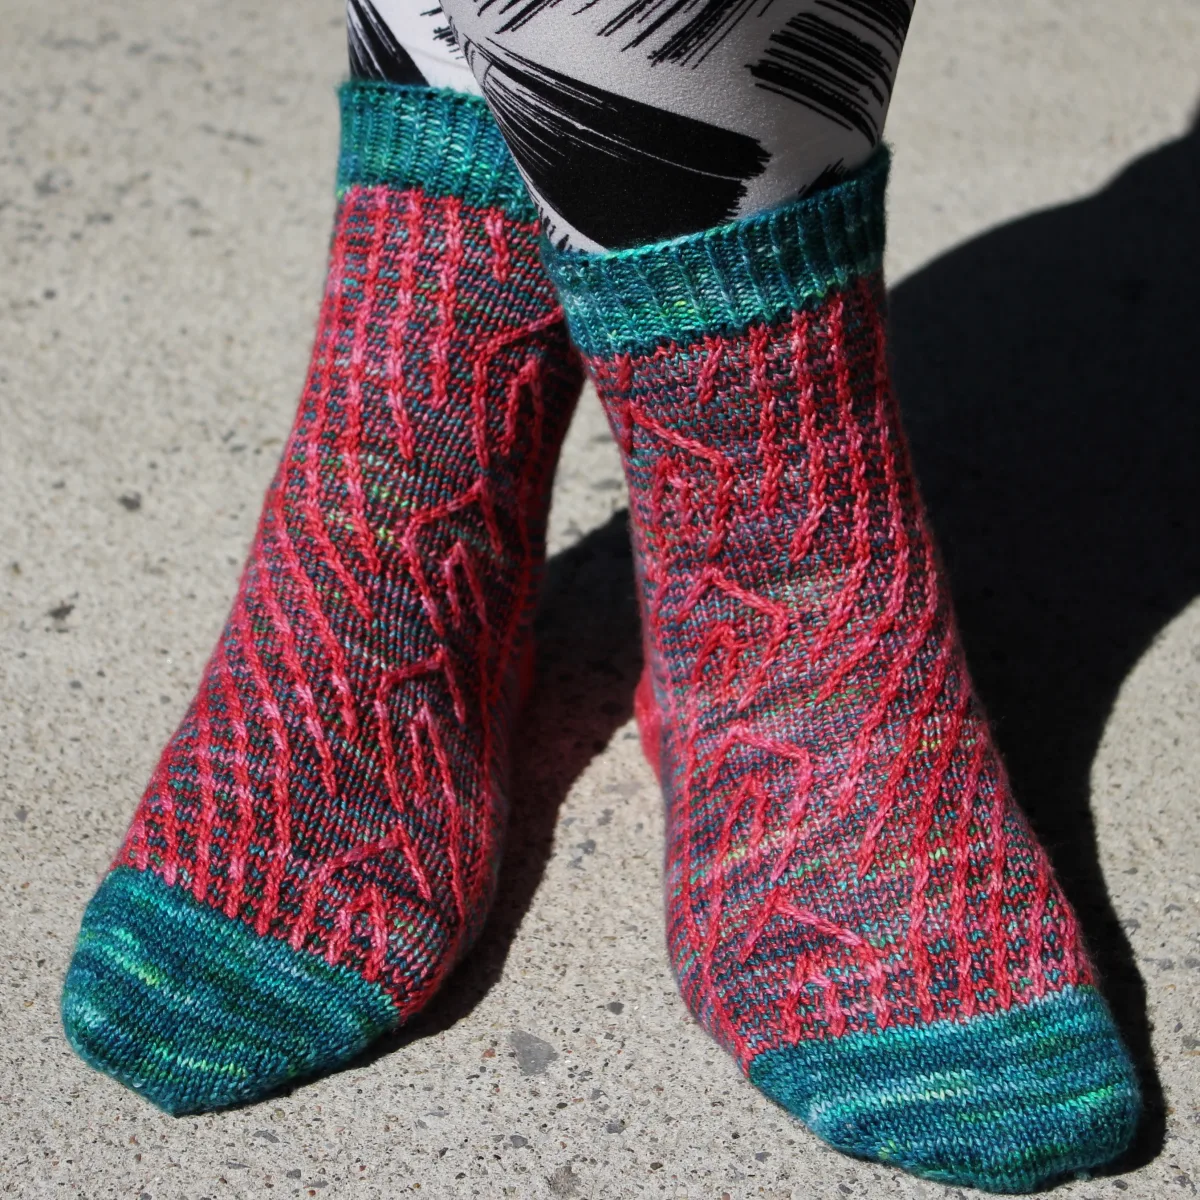 Front view of crossed legs wearing dark green and bright coral socks with vertical stripes that create an abstract surface texture.